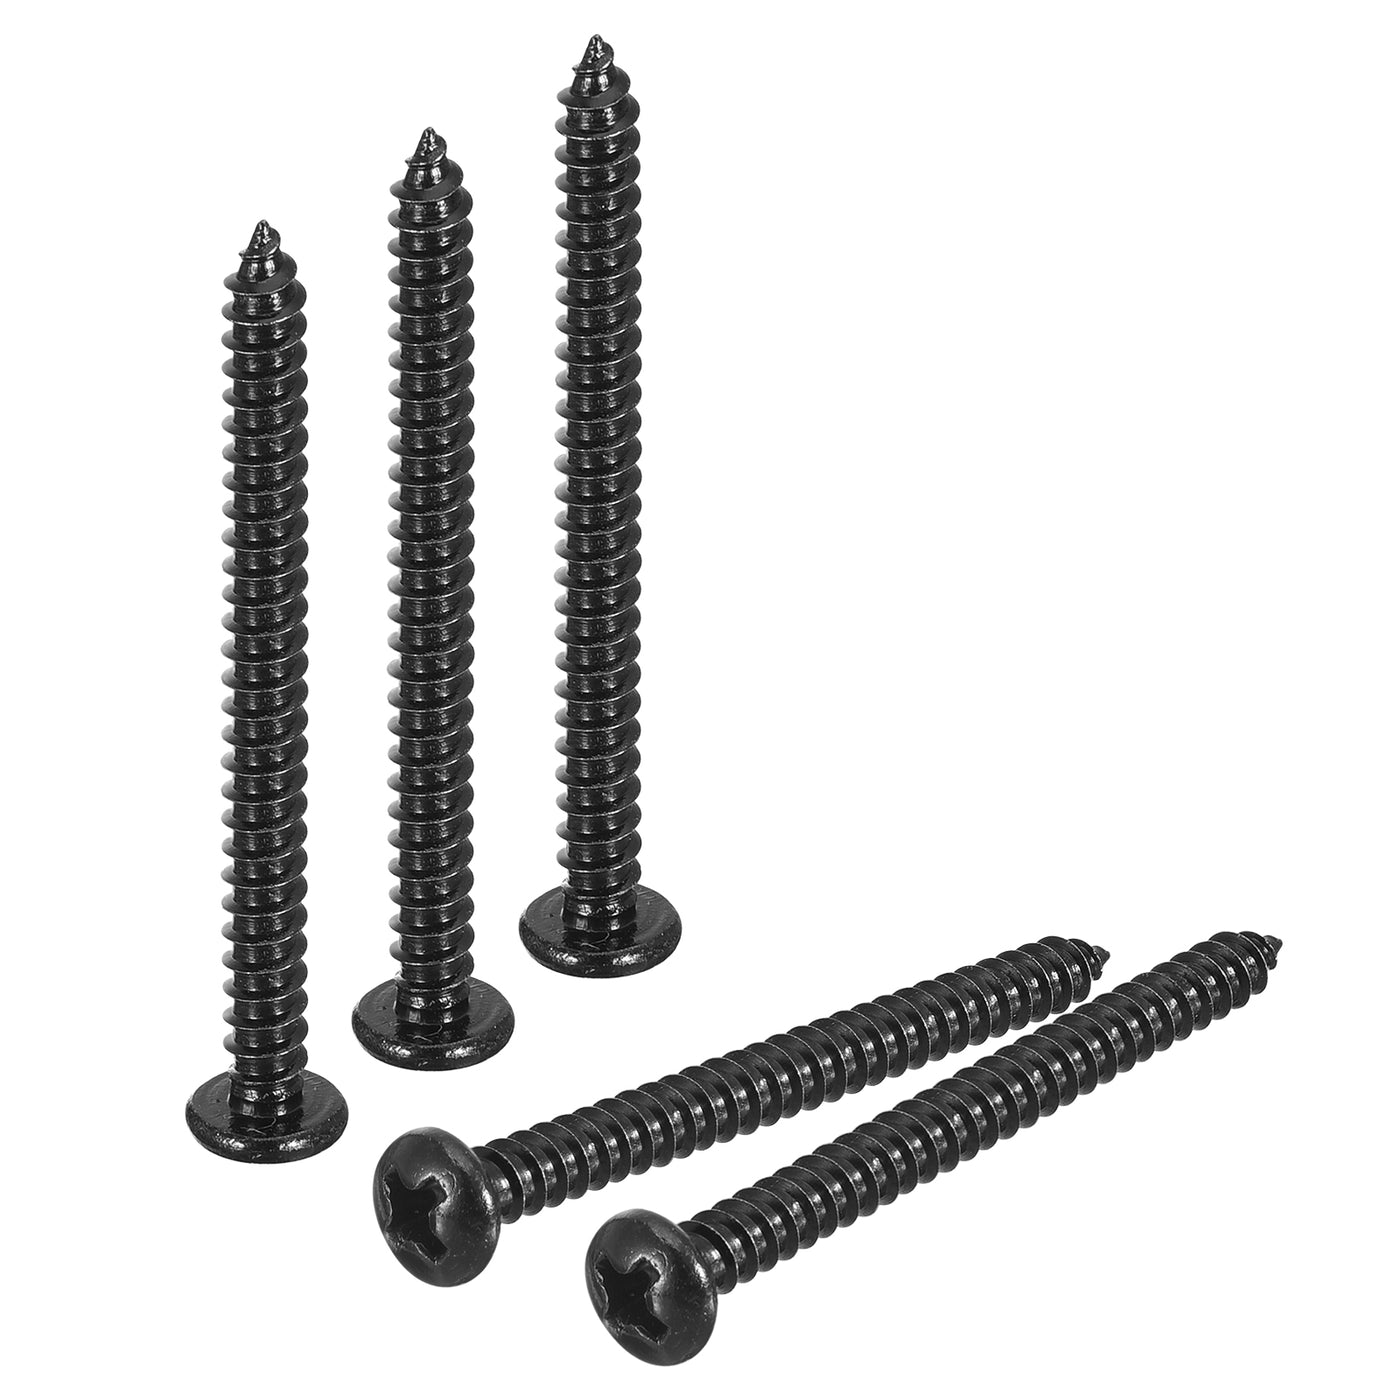 uxcell Uxcell #6 x 1-9/16" Phillips Pan Head Self-tapping Screw, 50pcs - 304 Stainless Steel Round Head Wood Screw Full Thread (Black)